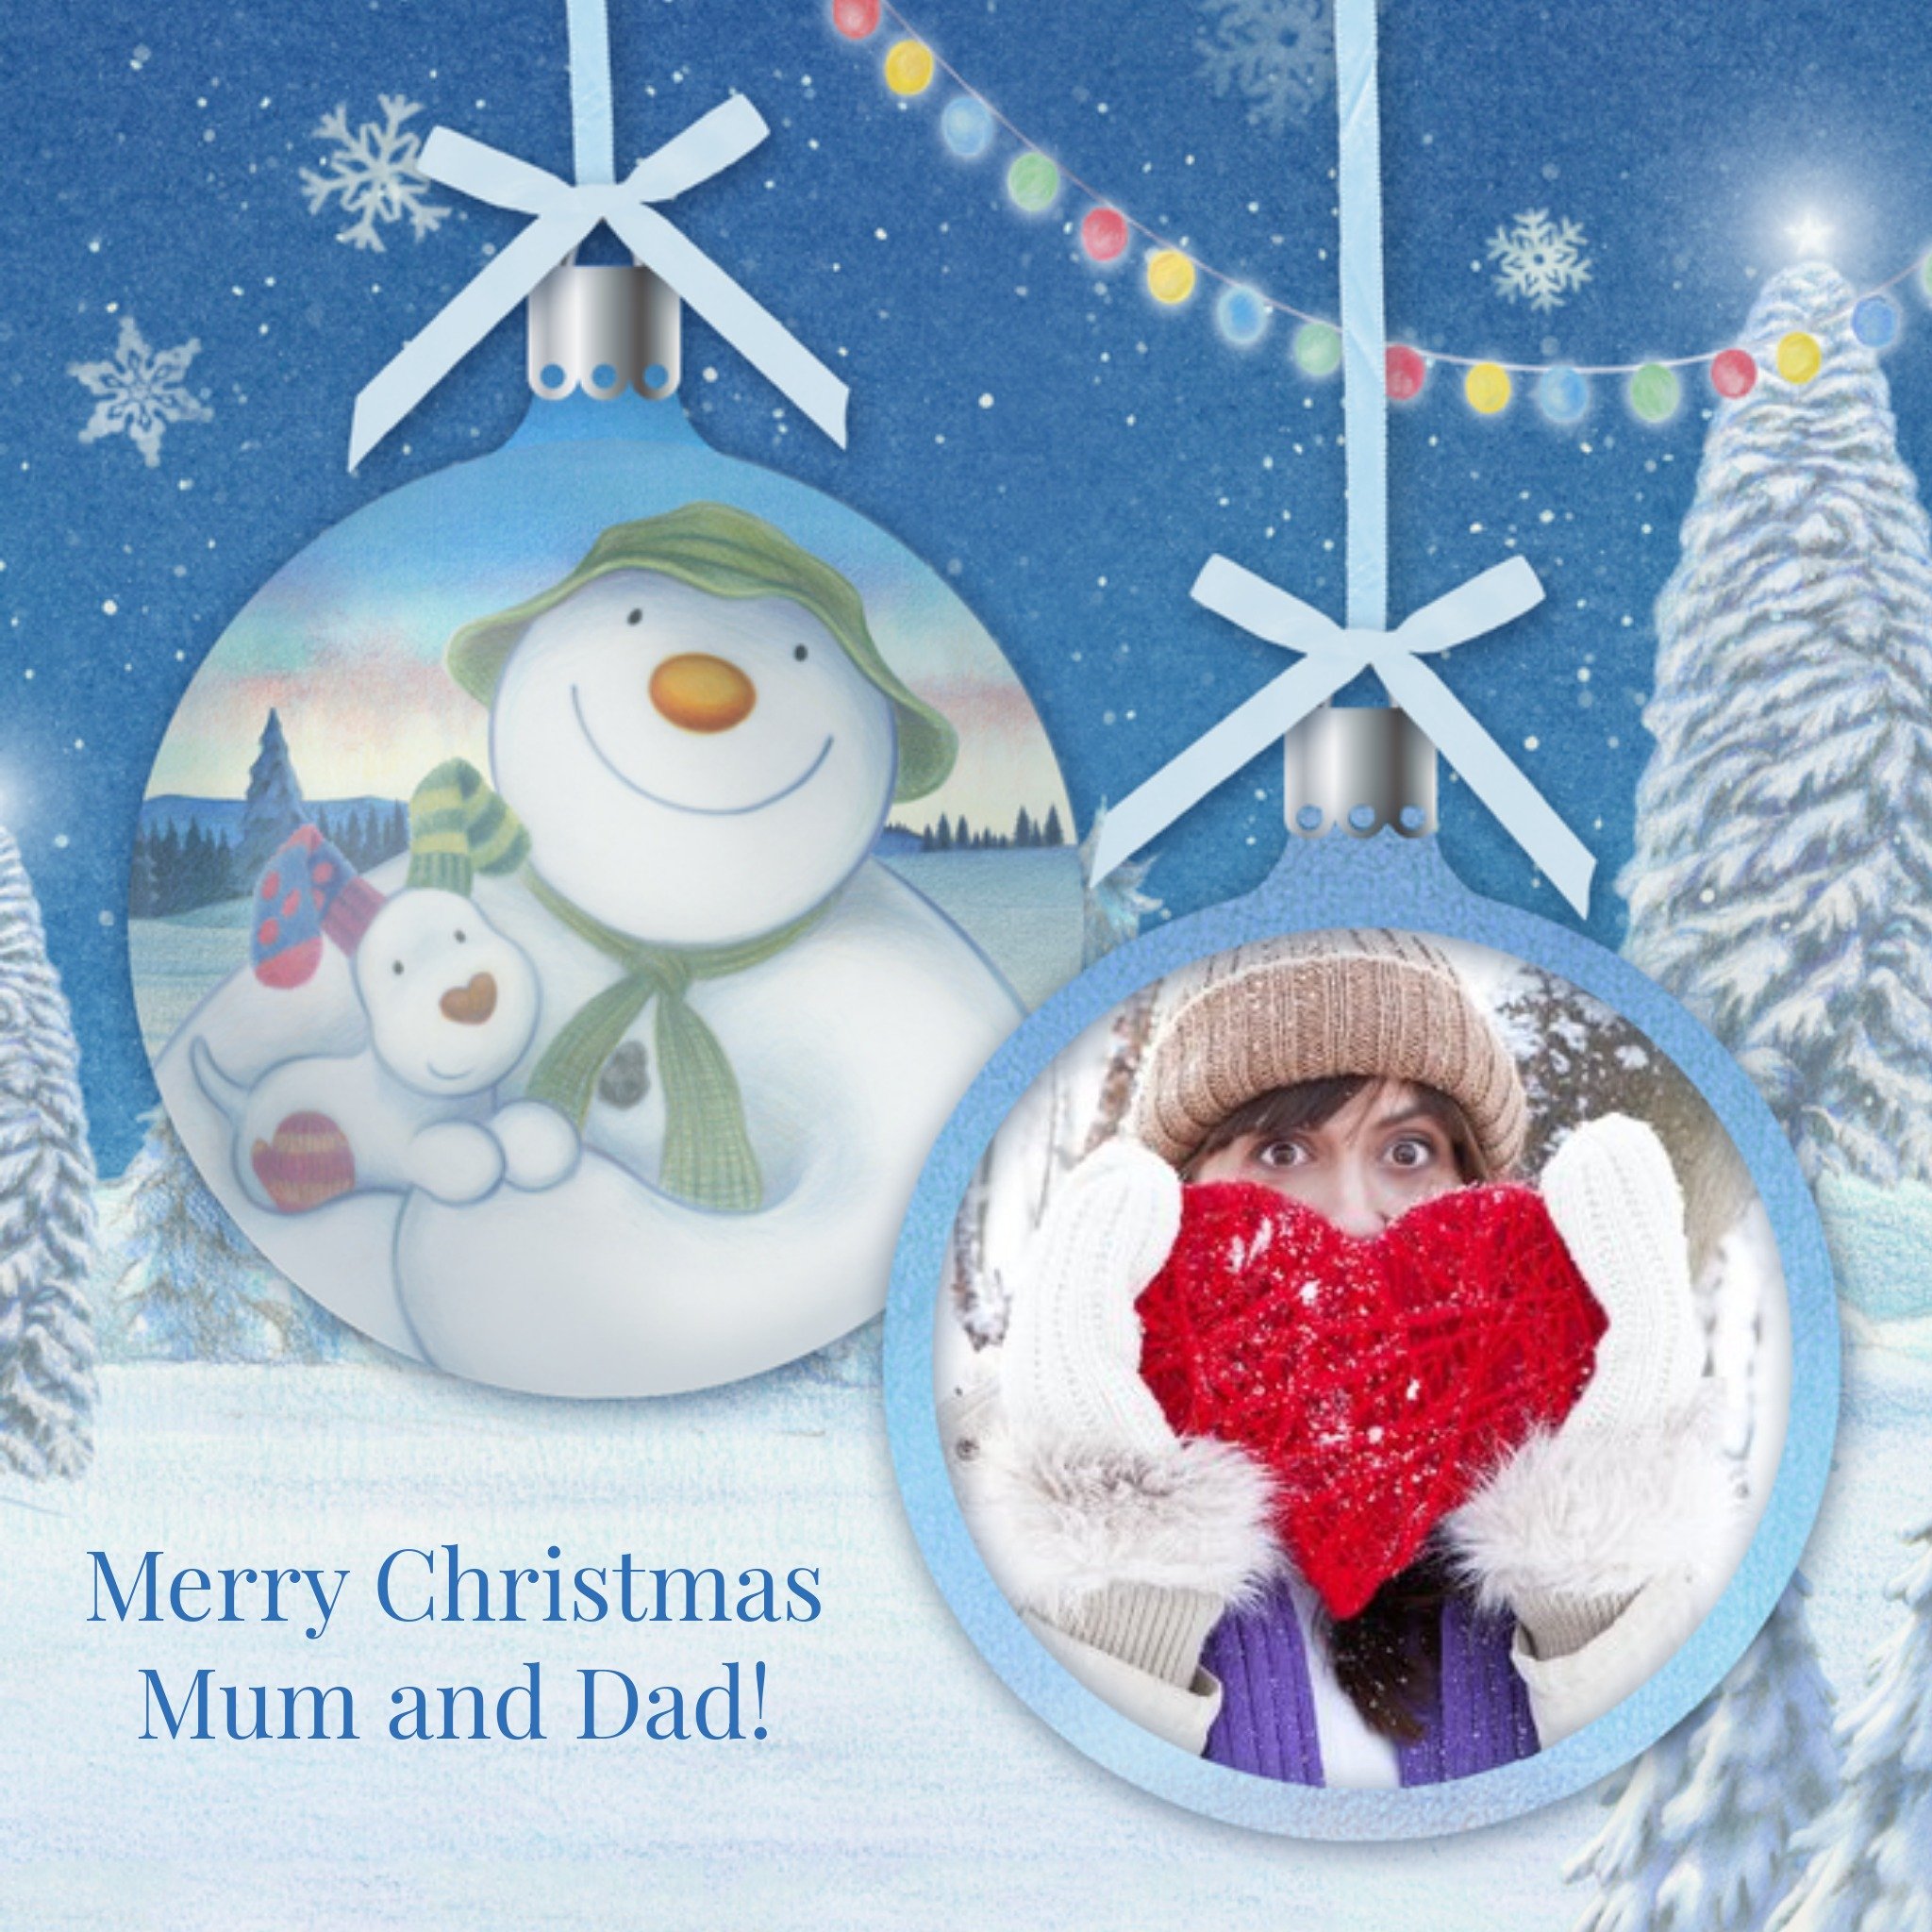 The Snowman Winter Wonderland Scenery With Photo Upload Bauble Christmas Card, Square